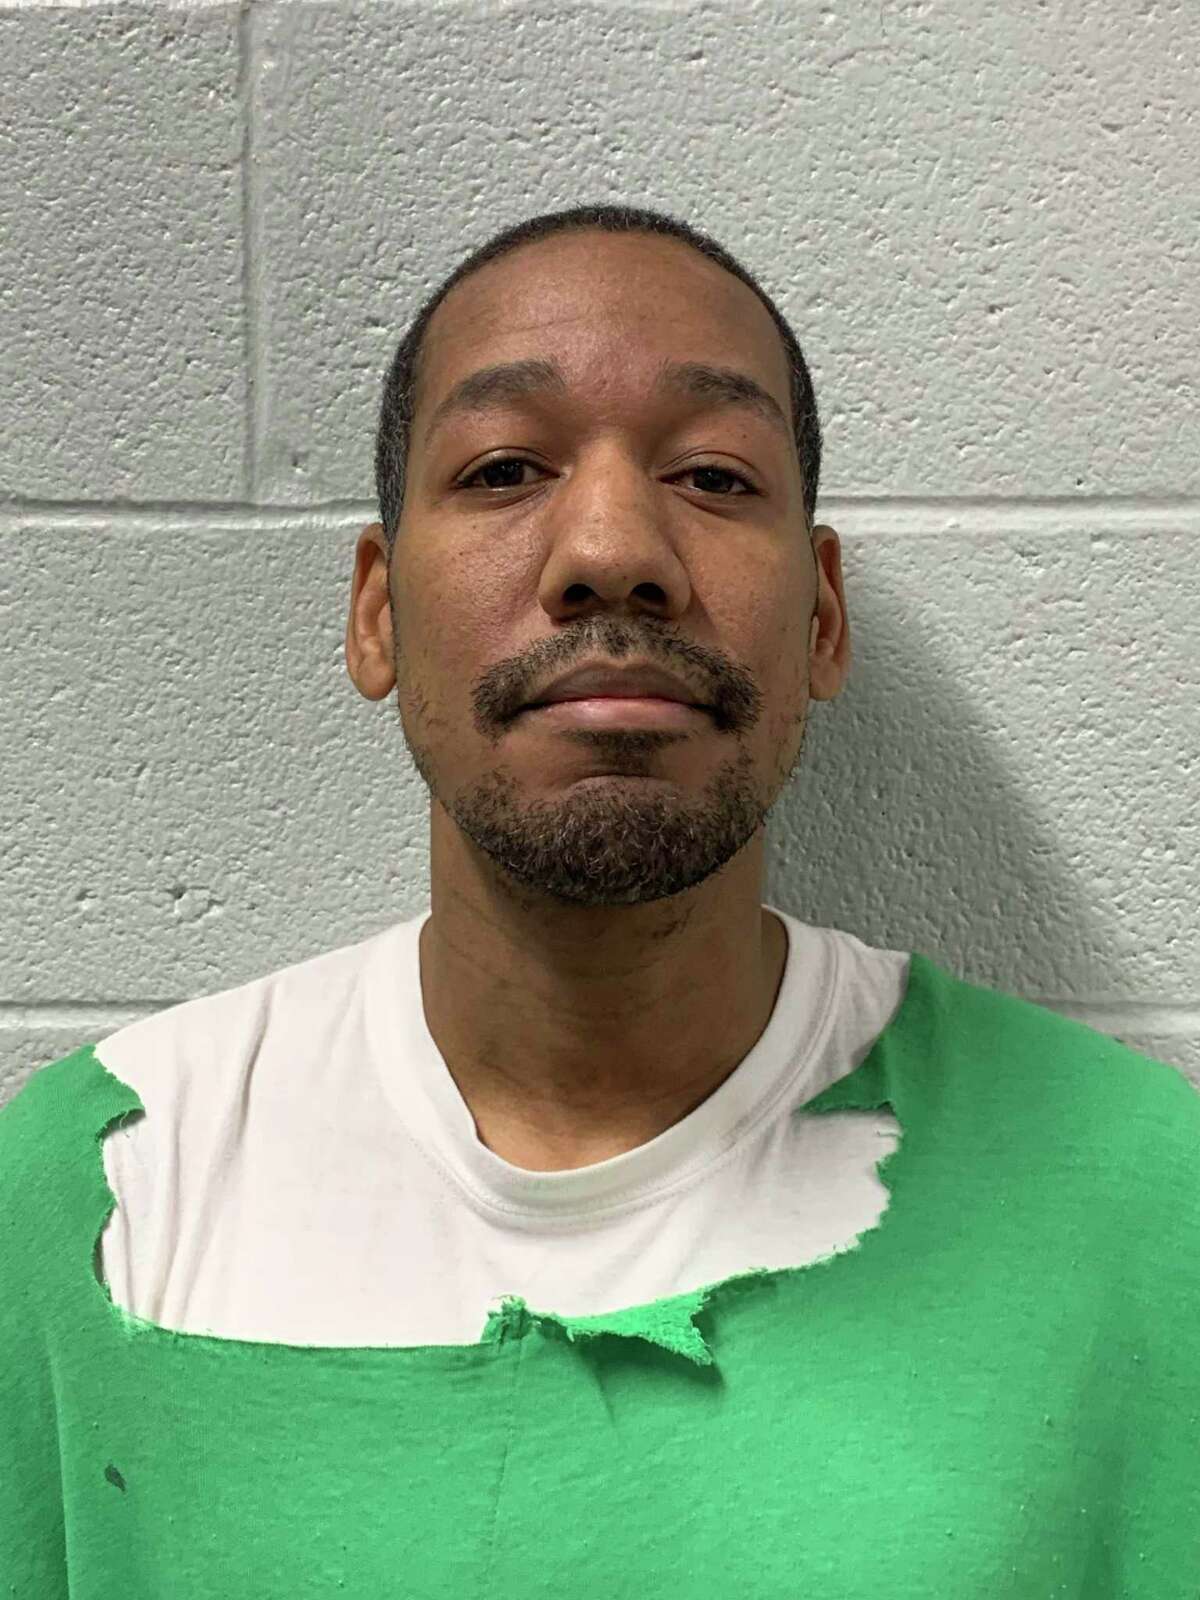 Richard White, 37, of Torrington, is suspected of starting four fires last month in Connecticut, including Roxbury, officials said. Old Saybrook police have charged him with arson.